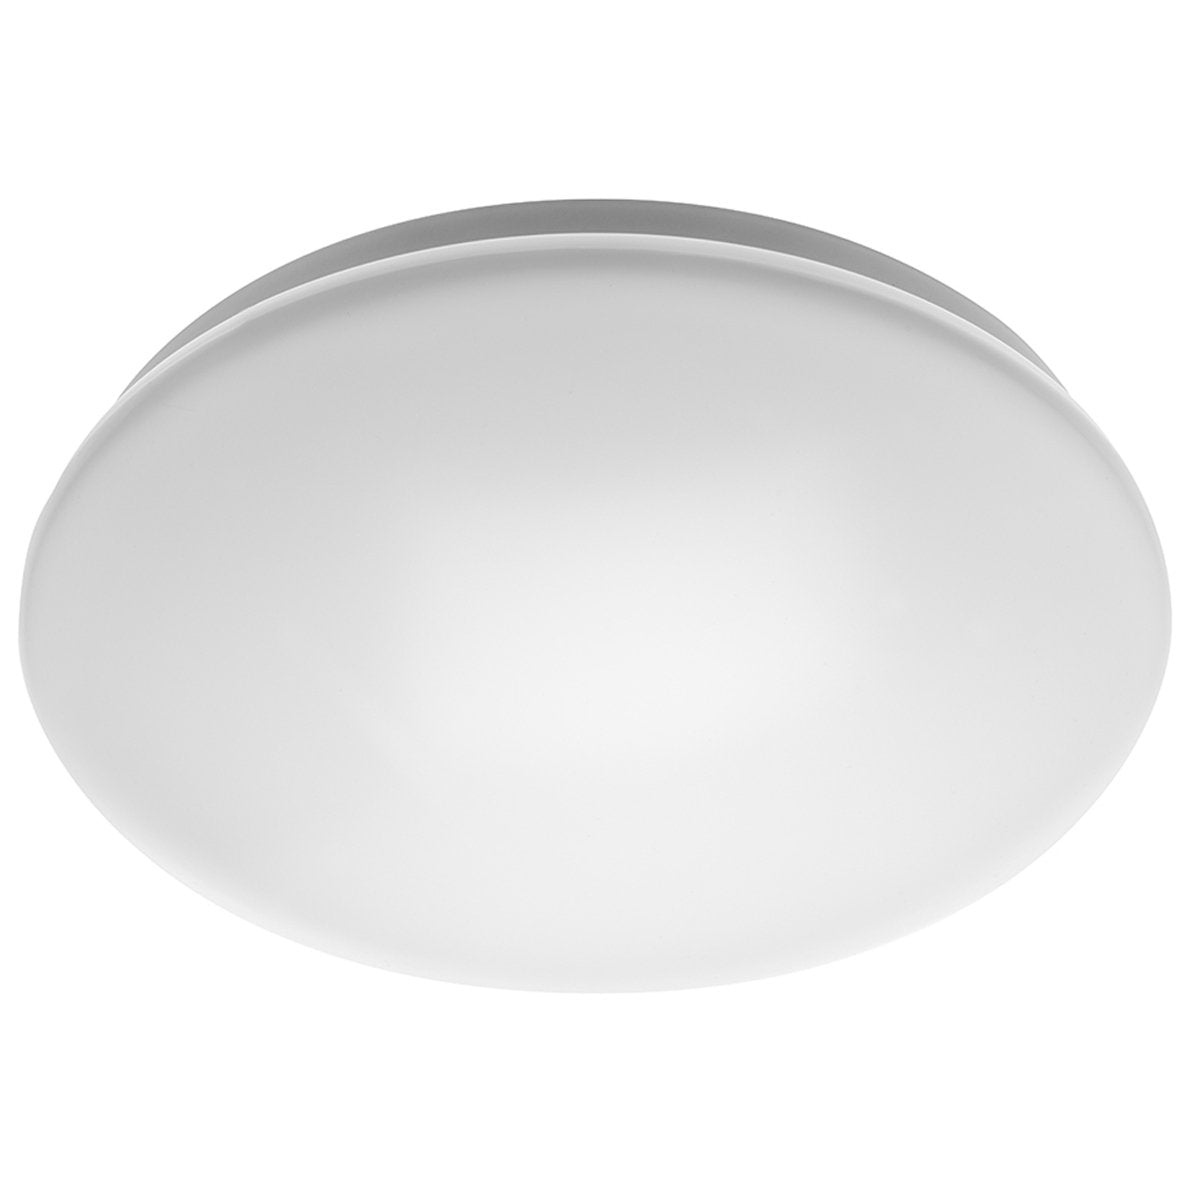 CGC ELLIE White Circular 18W Wall Or Ceiling Light With Opal Diffuser